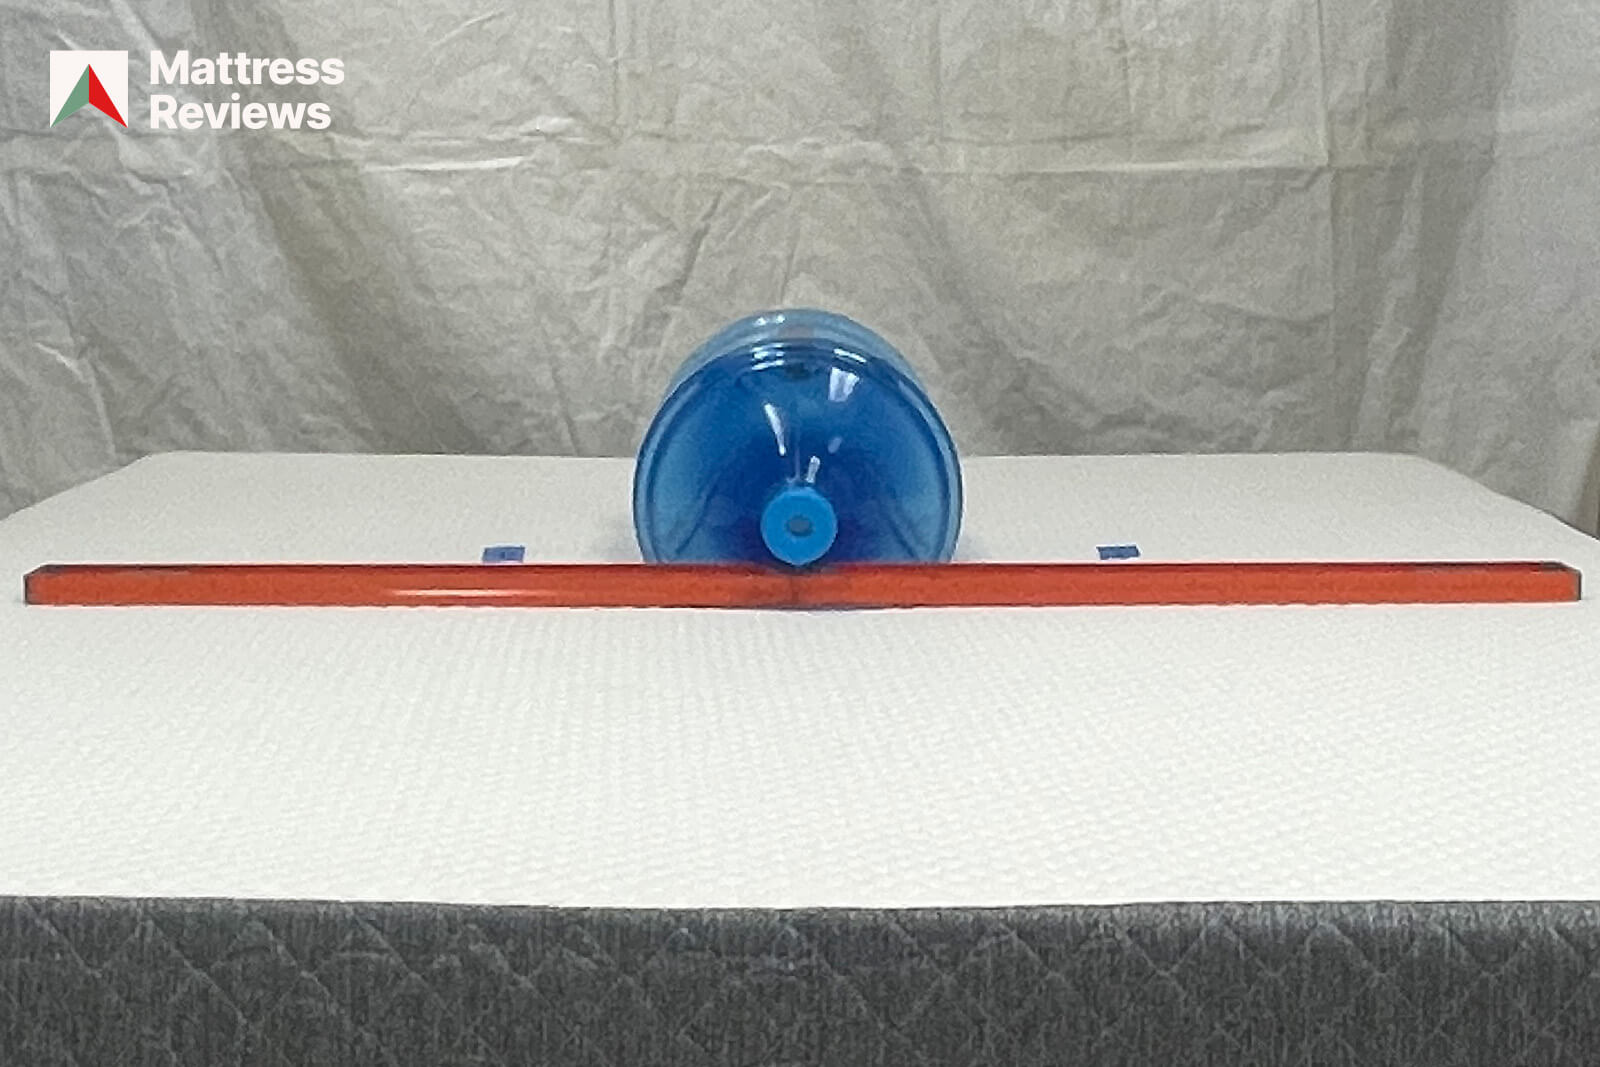 Photo of a water jug and level on the GhostBed Classic mattress to demonstrate firmness